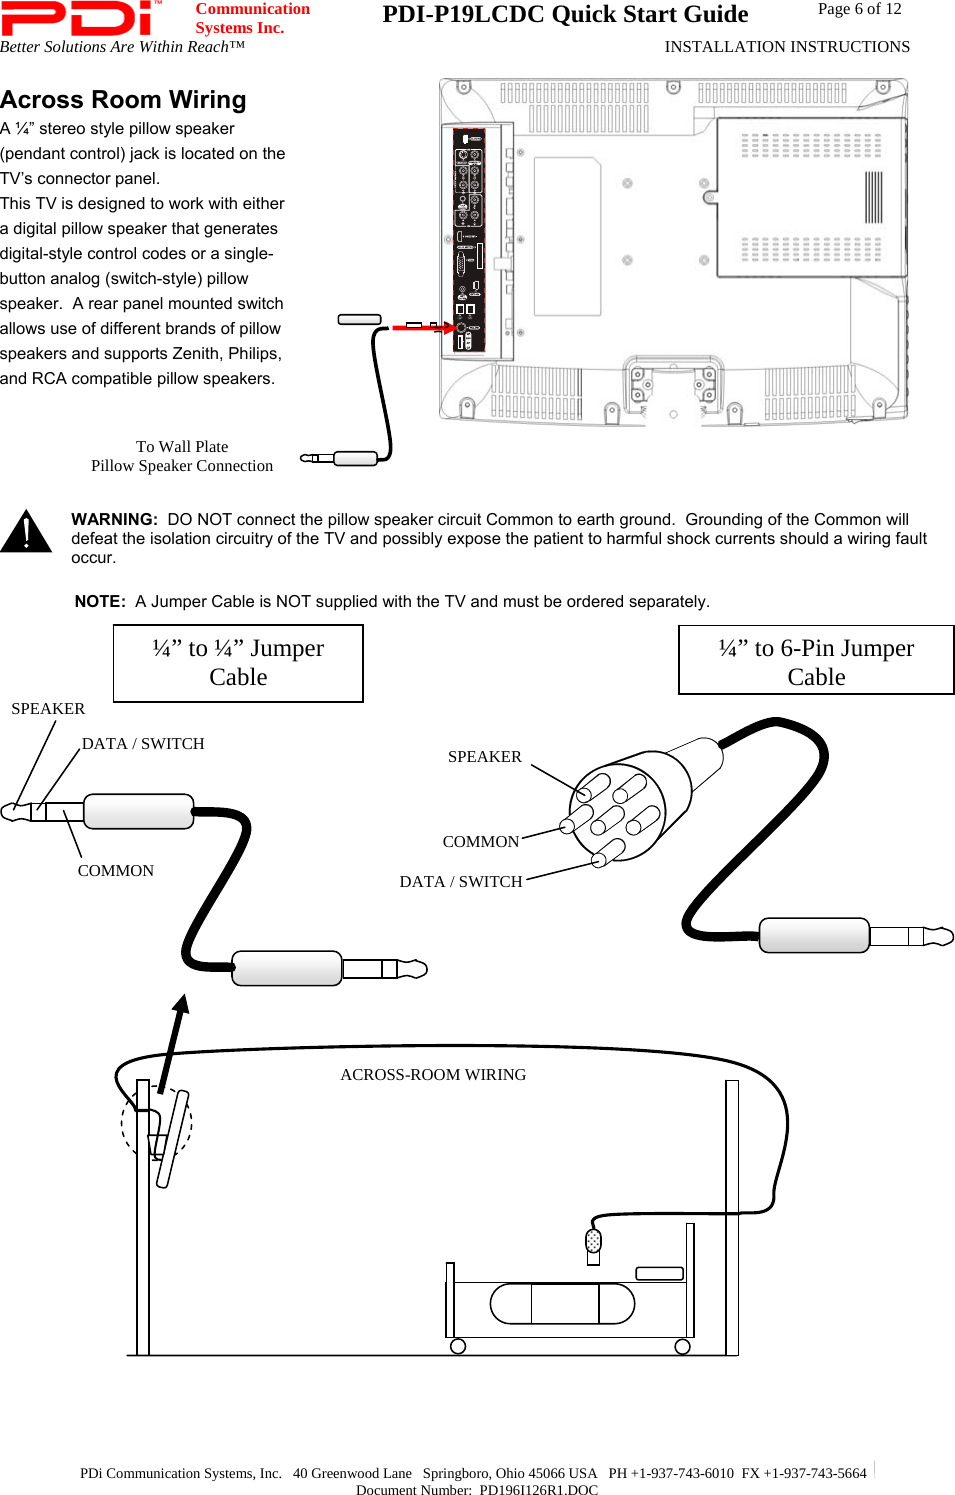  Communication  Systems Inc.  PDI-P19LCDC Quick Start Guide  Page 6 of 12 Better Solutions Are Within Reach™  INSTALLATION INSTRUCTIONS  PDi Communication Systems, Inc.   40 Greenwood Lane   Springboro, Ohio 45066 USA   PH +1-937-743-6010  FX +1-937-743-5664   Document Number:  PD196I126R1.DOC Across Room Wiring A ¼” stereo style pillow speaker (pendant control) jack is located on the TV’s connector panel.  This TV is designed to work with either a digital pillow speaker that generates digital-style control codes or a single-button analog (switch-style) pillow speaker.  A rear panel mounted switch allows use of different brands of pillow speakers and supports Zenith, Philips, and RCA compatible pillow speakers.    WARNING:  DO NOT connect the pillow speaker circuit Common to earth ground.  Grounding of the Common will defeat the isolation circuitry of the TV and possibly expose the patient to harmful shock currents should a wiring fault occur.  NOTE:  A Jumper Cable is NOT supplied with the TV and must be ordered separately.                                           To Wall Plate Pillow Speaker Connection  SPEAKER DATA / SWITCH COMMON ¼” to 6-Pin Jumper Cable¼” to ¼” Jumper Cable ACROSS-ROOM WIRINGSPEAKER DATA / SWITCH COMMON 